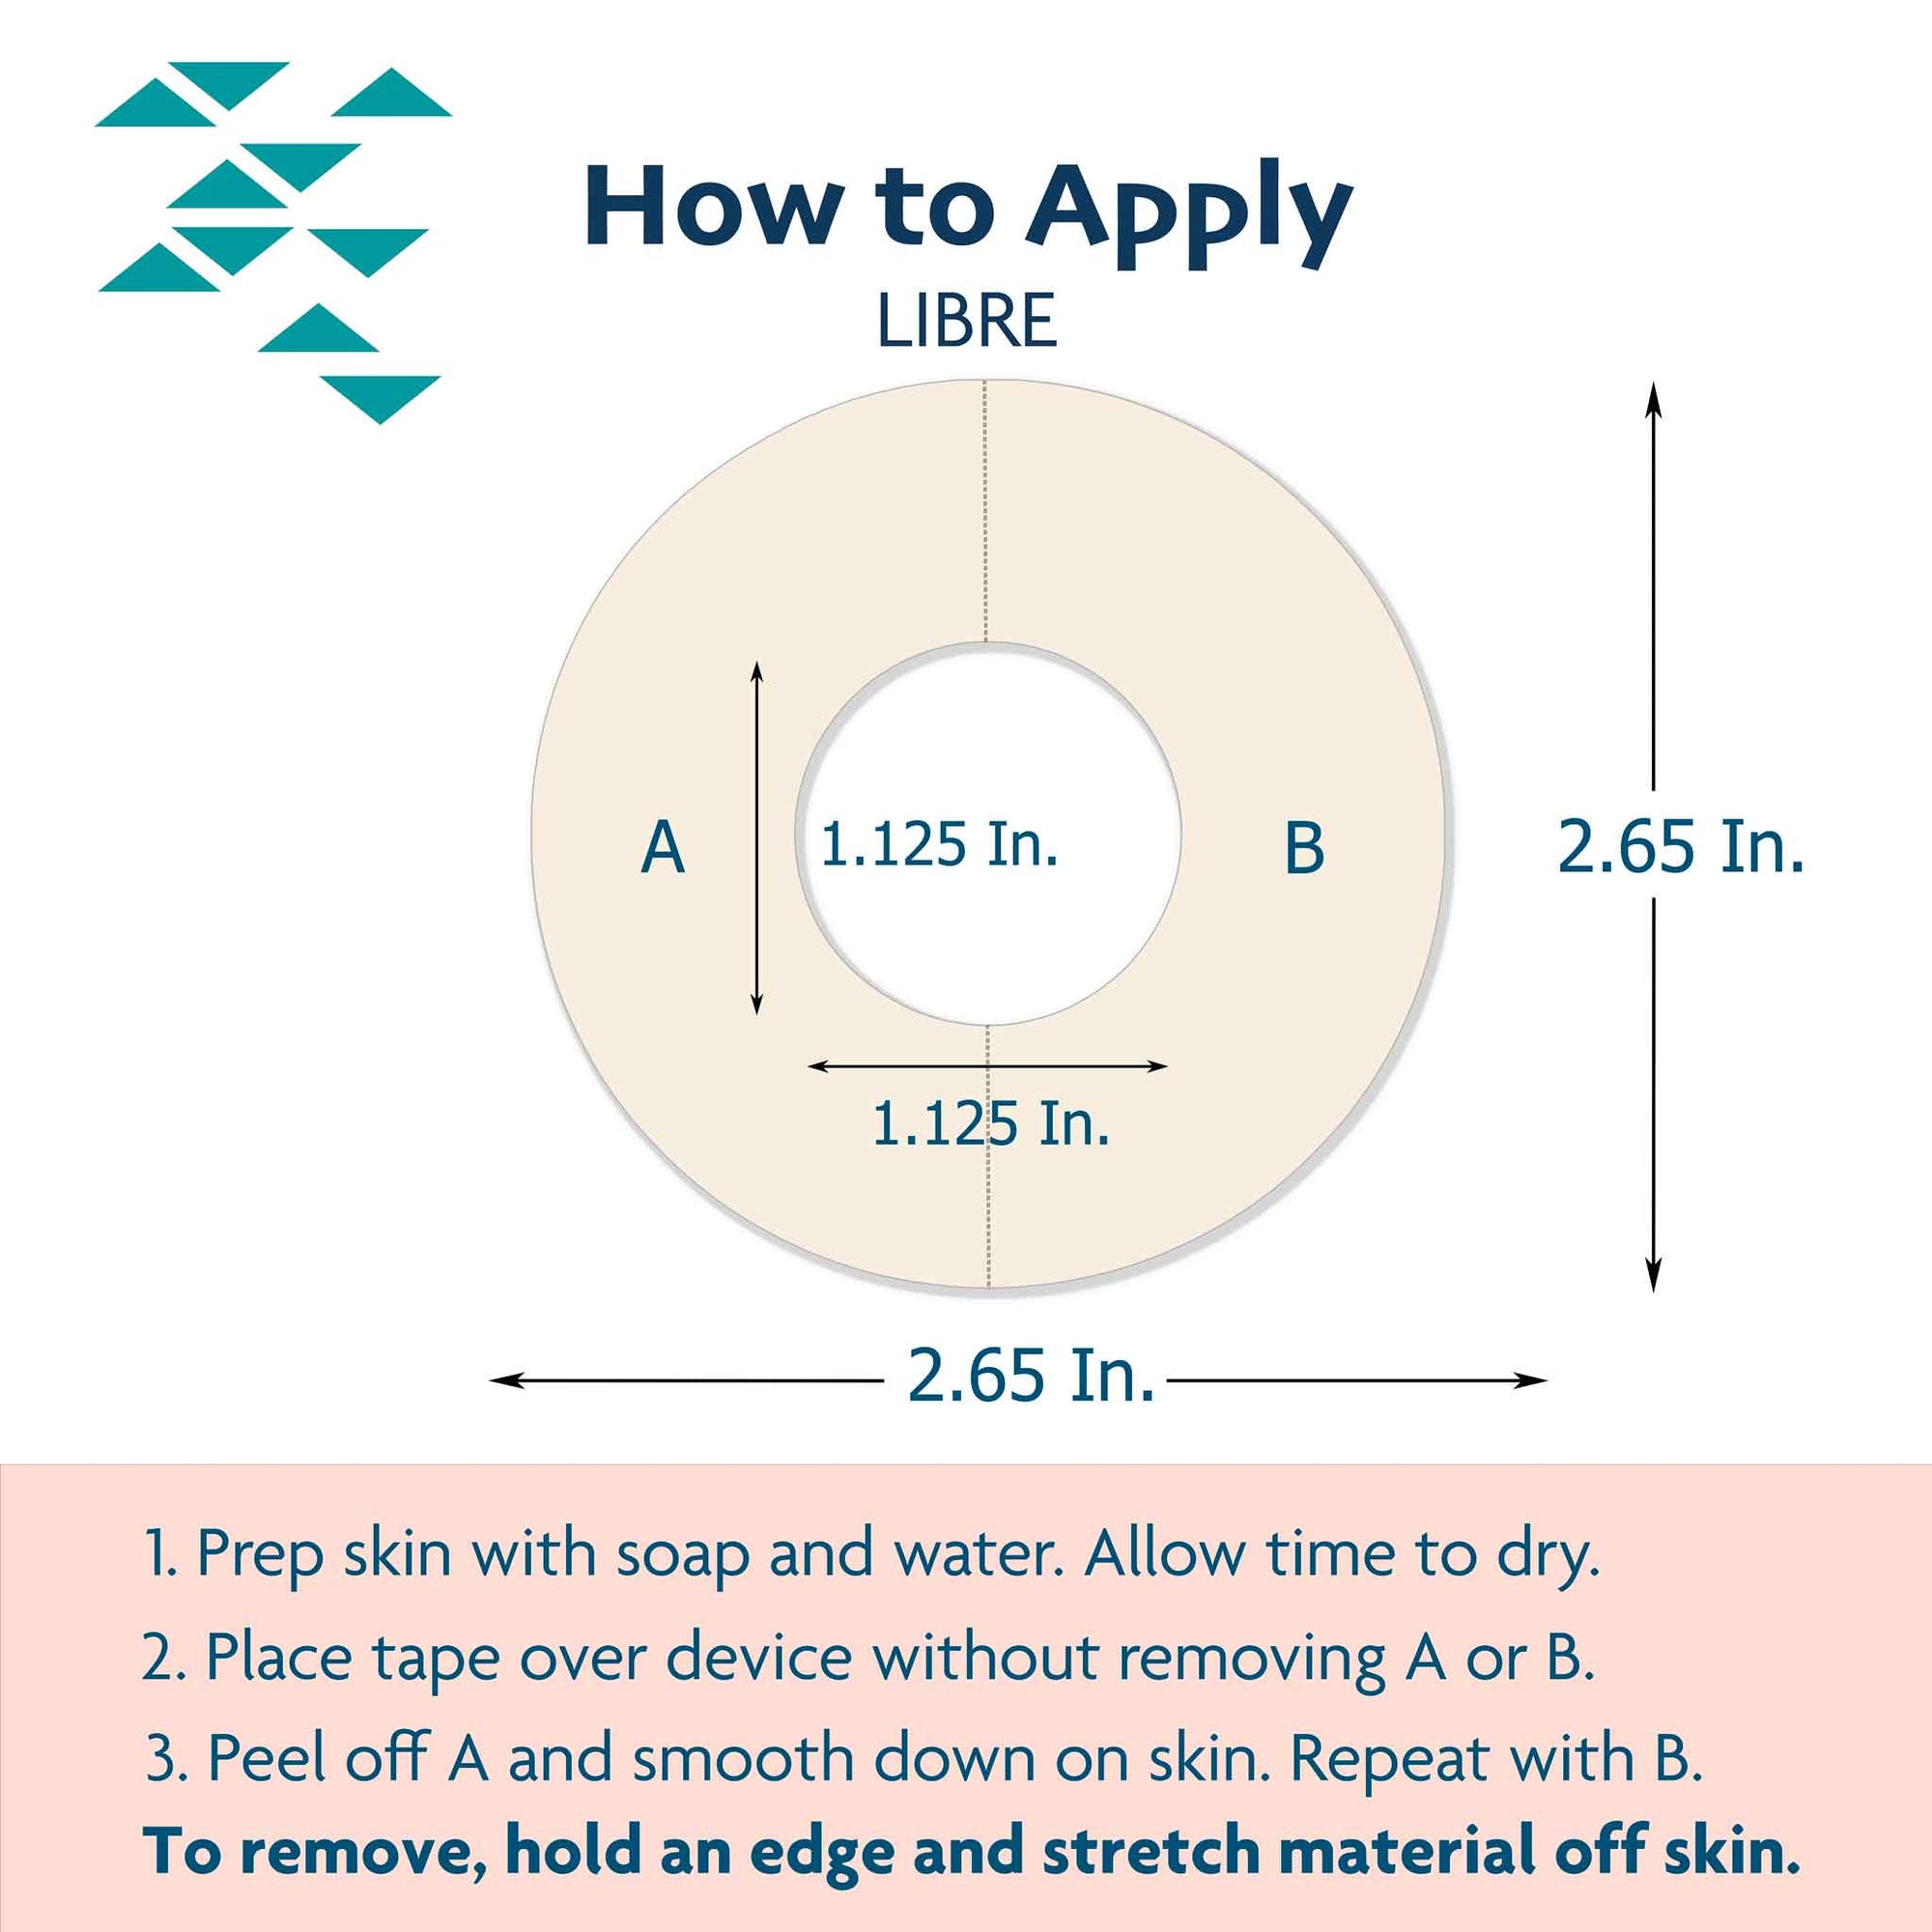 Freestyle Libre application tutorial step by step to properly secure your CGM